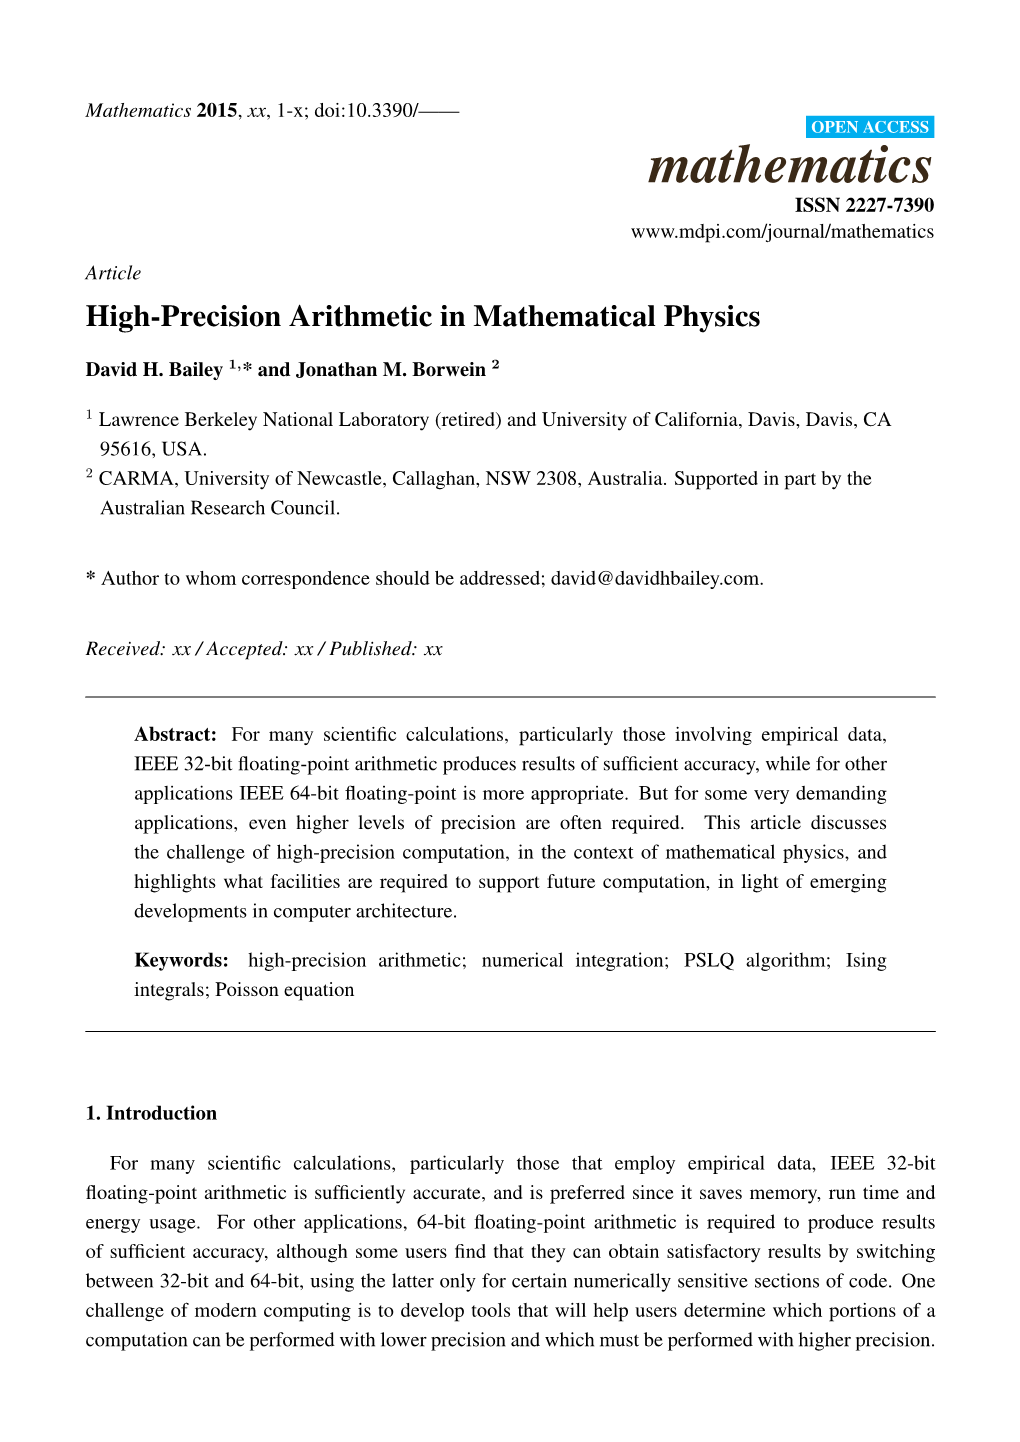 High-Precision Arithmetic in Mathematical Physics